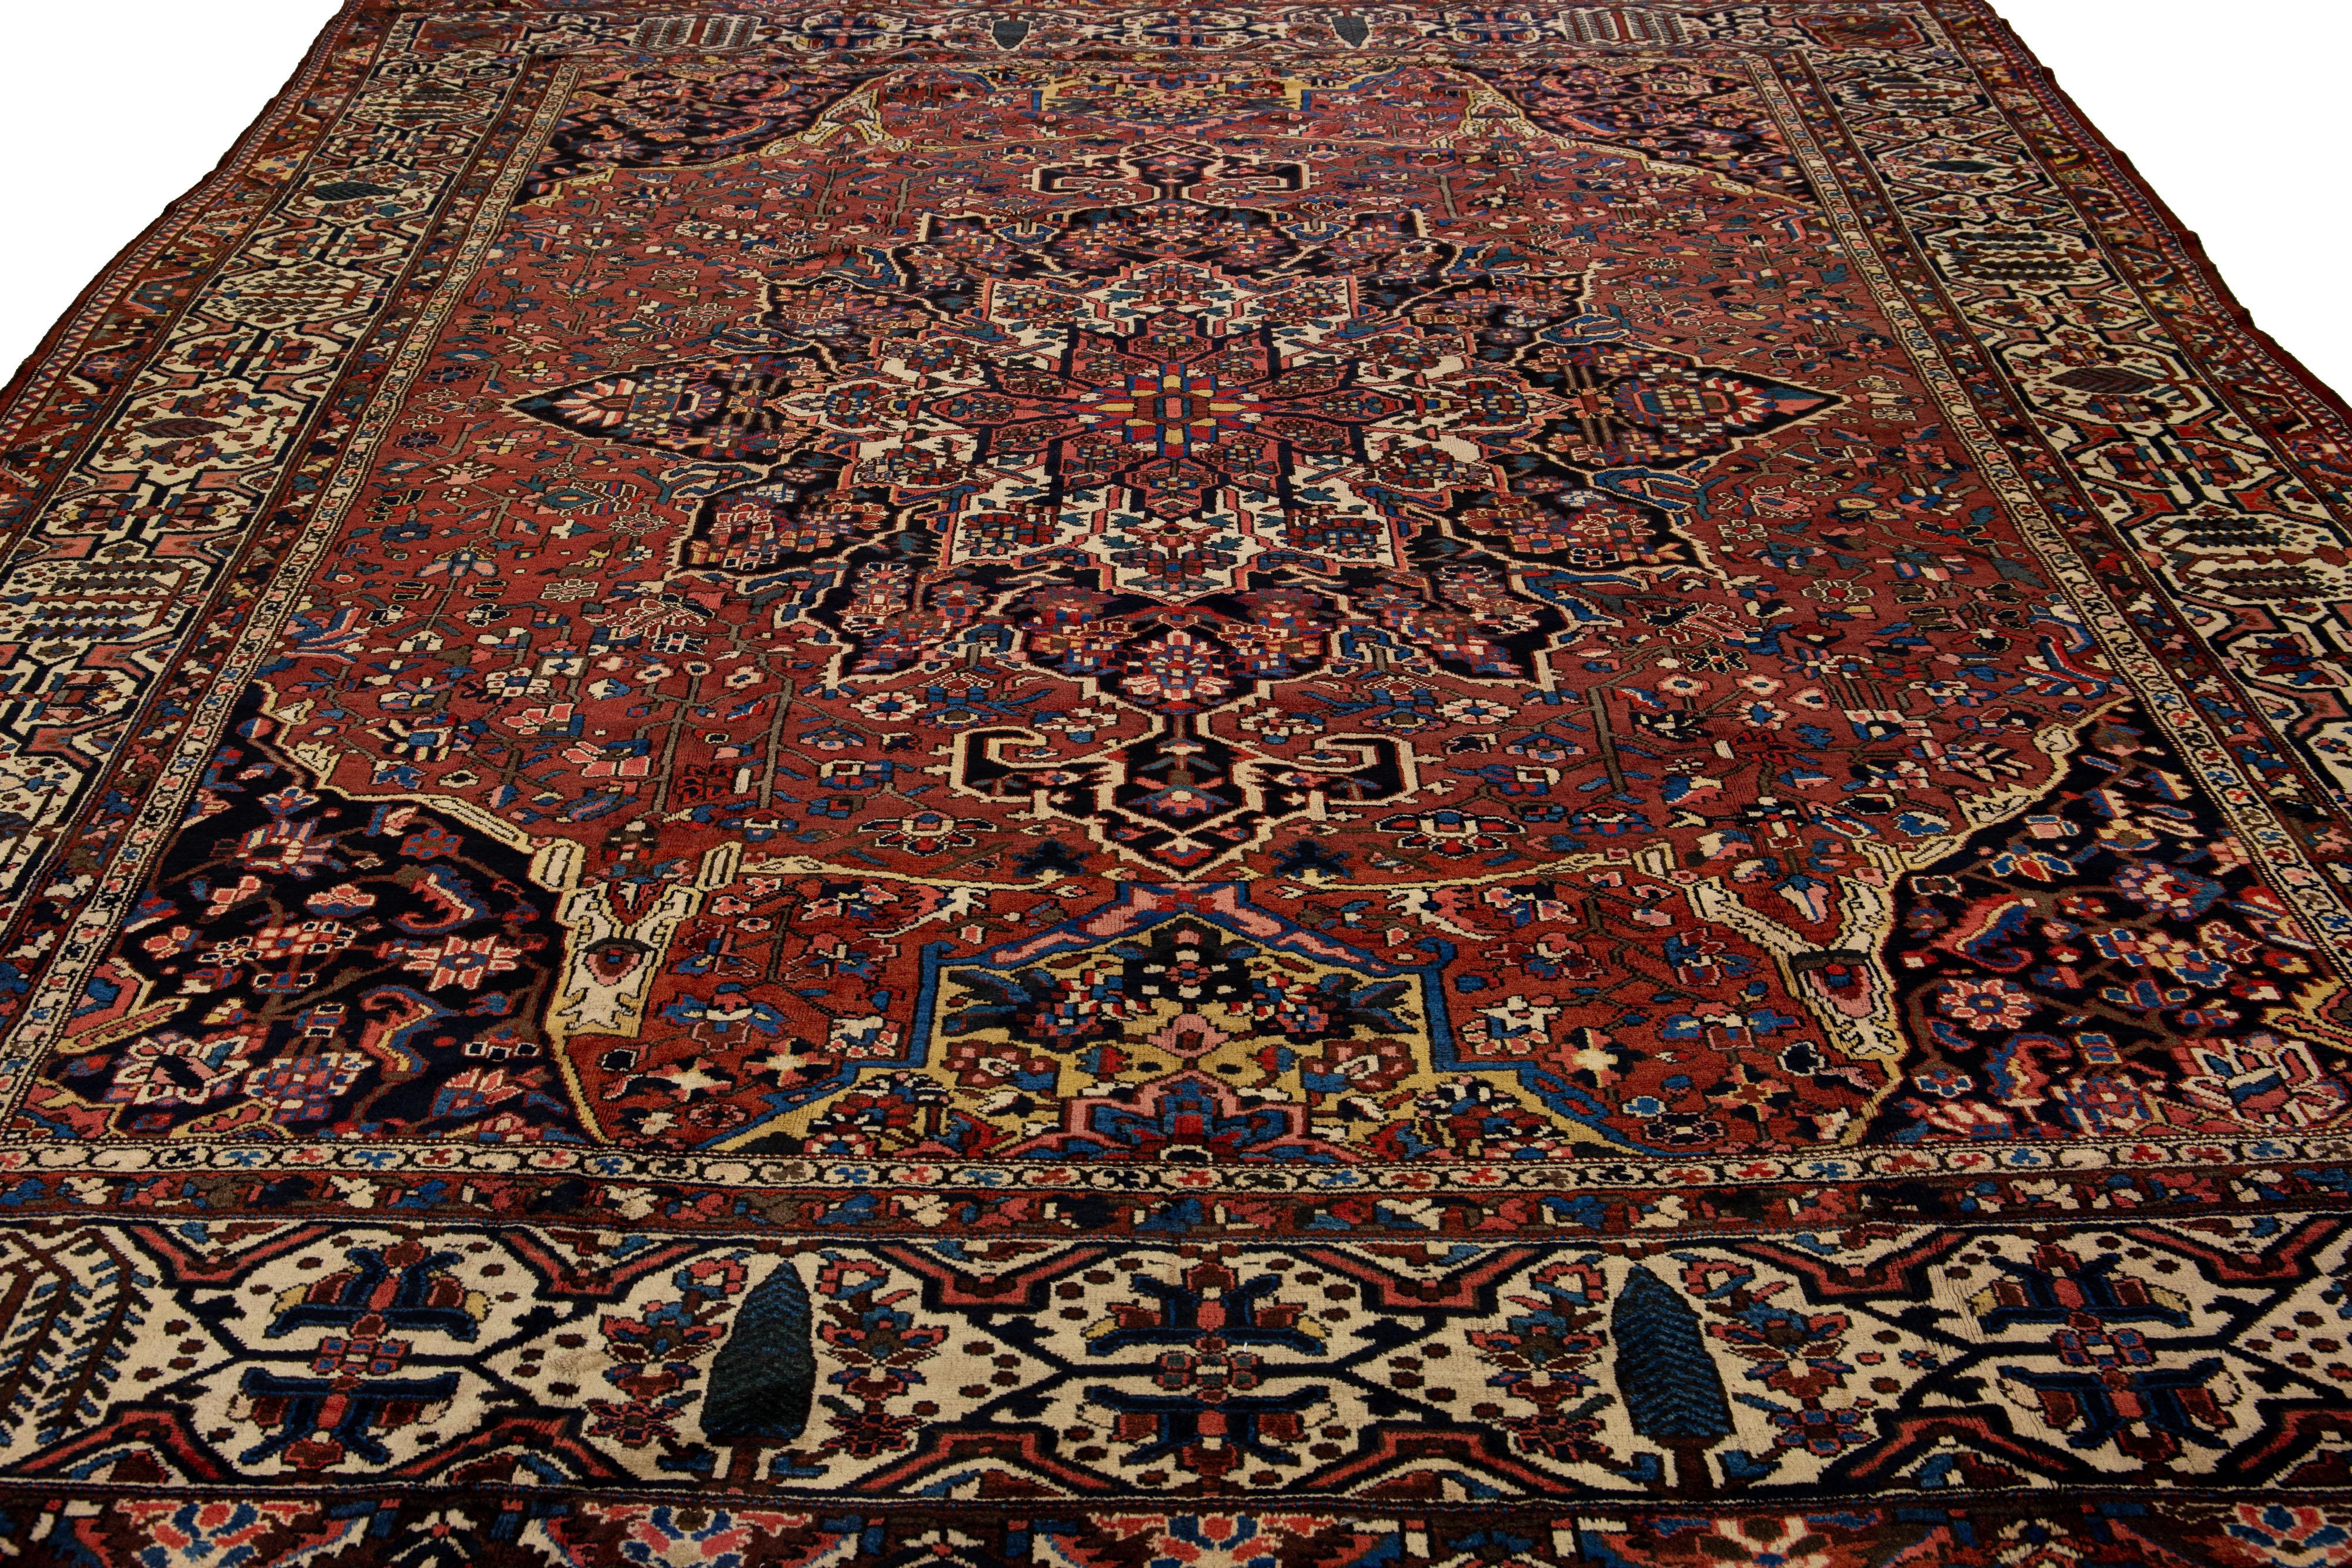 Beautiful Antique Bakhtiari hand-knotted wool rug with a red burgundy field. This Persian piece has an all-over multicolor accent in a gorgeous classic Medallion motif.

This rug measures 12'5